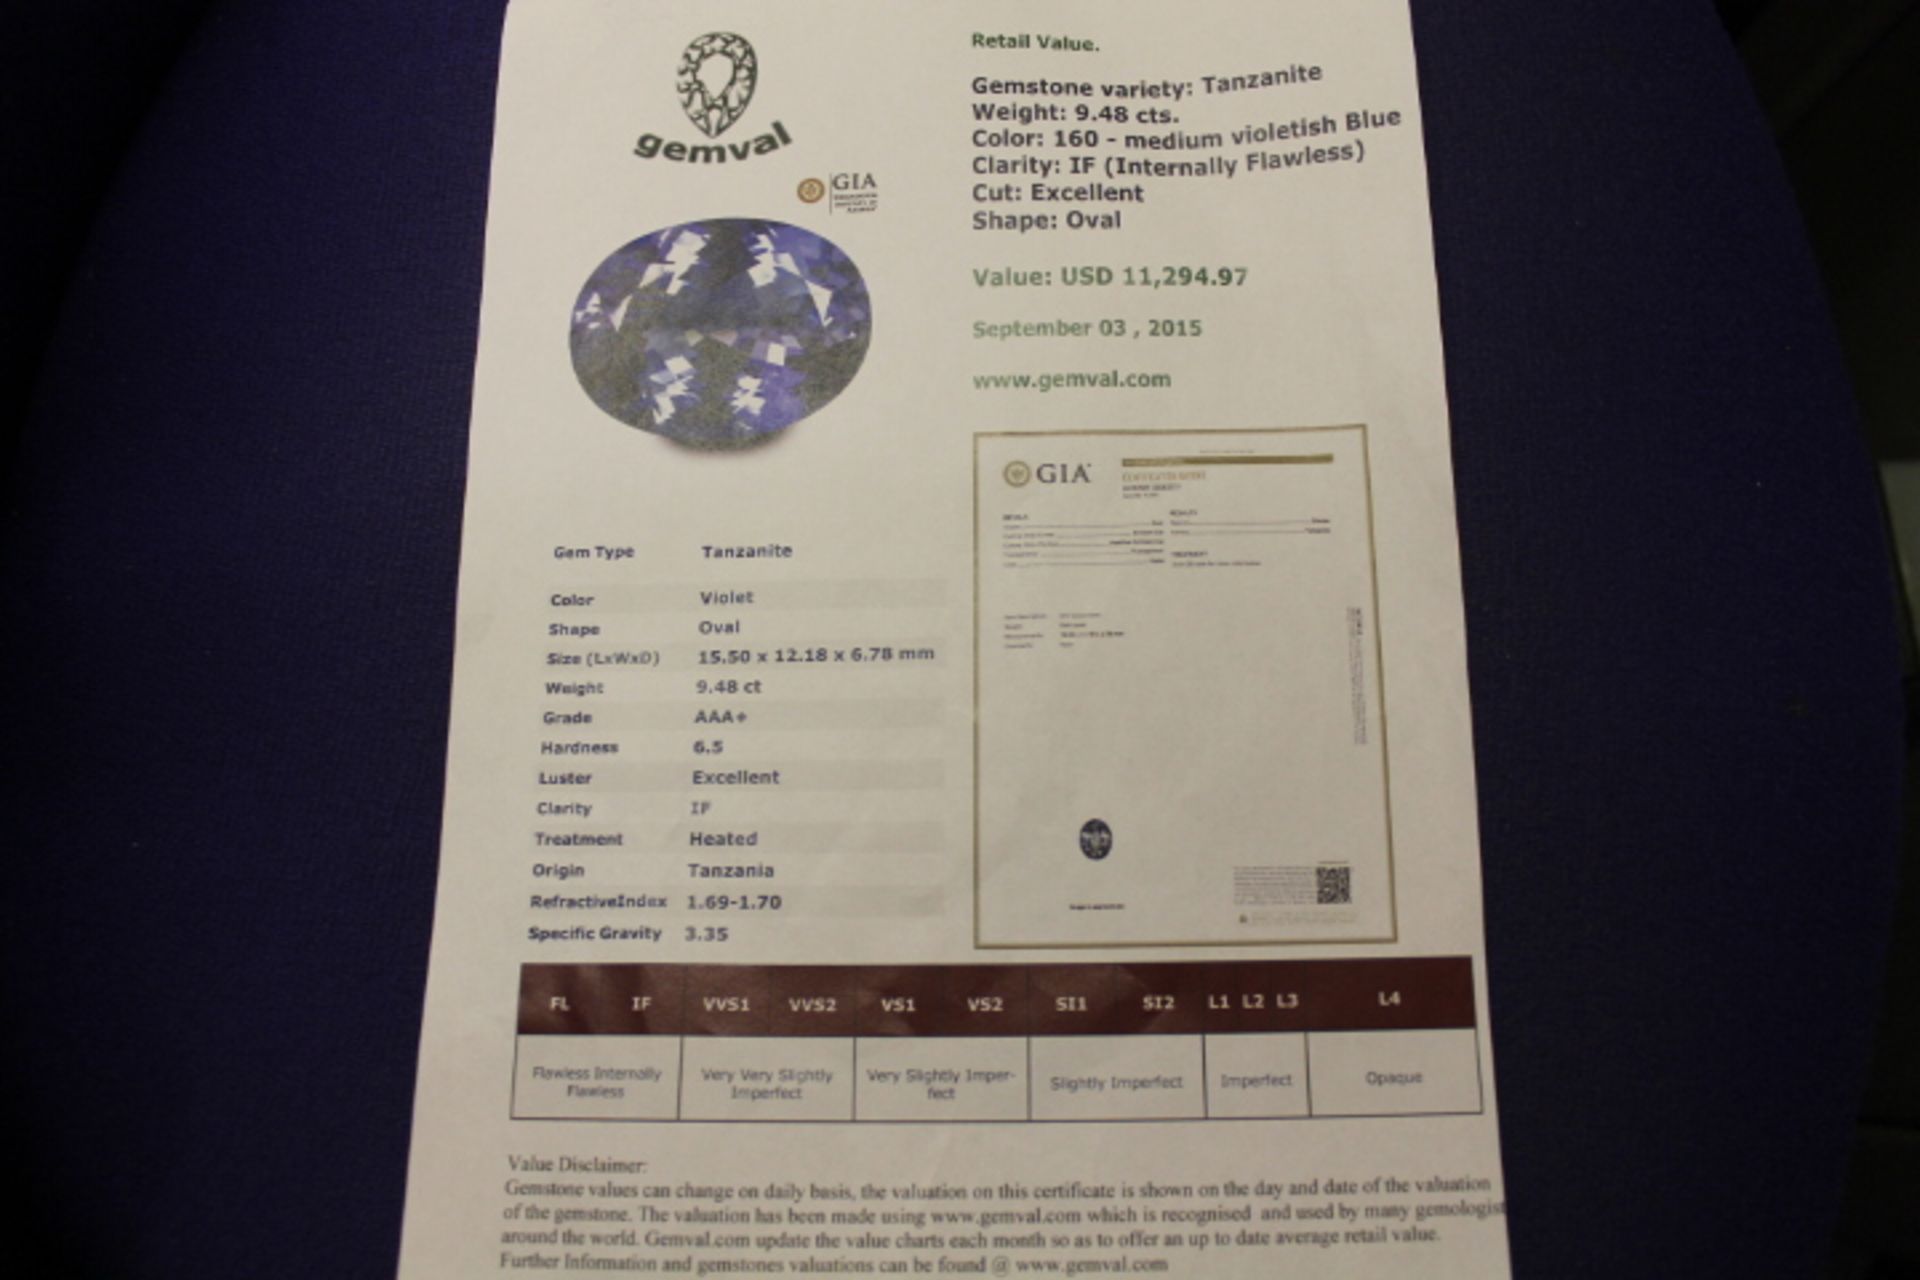 Tanzanite 9.48ct Gem With Certificate - Gem Valued At $11,294.97 (Approx £7369.57) - Image 3 of 3